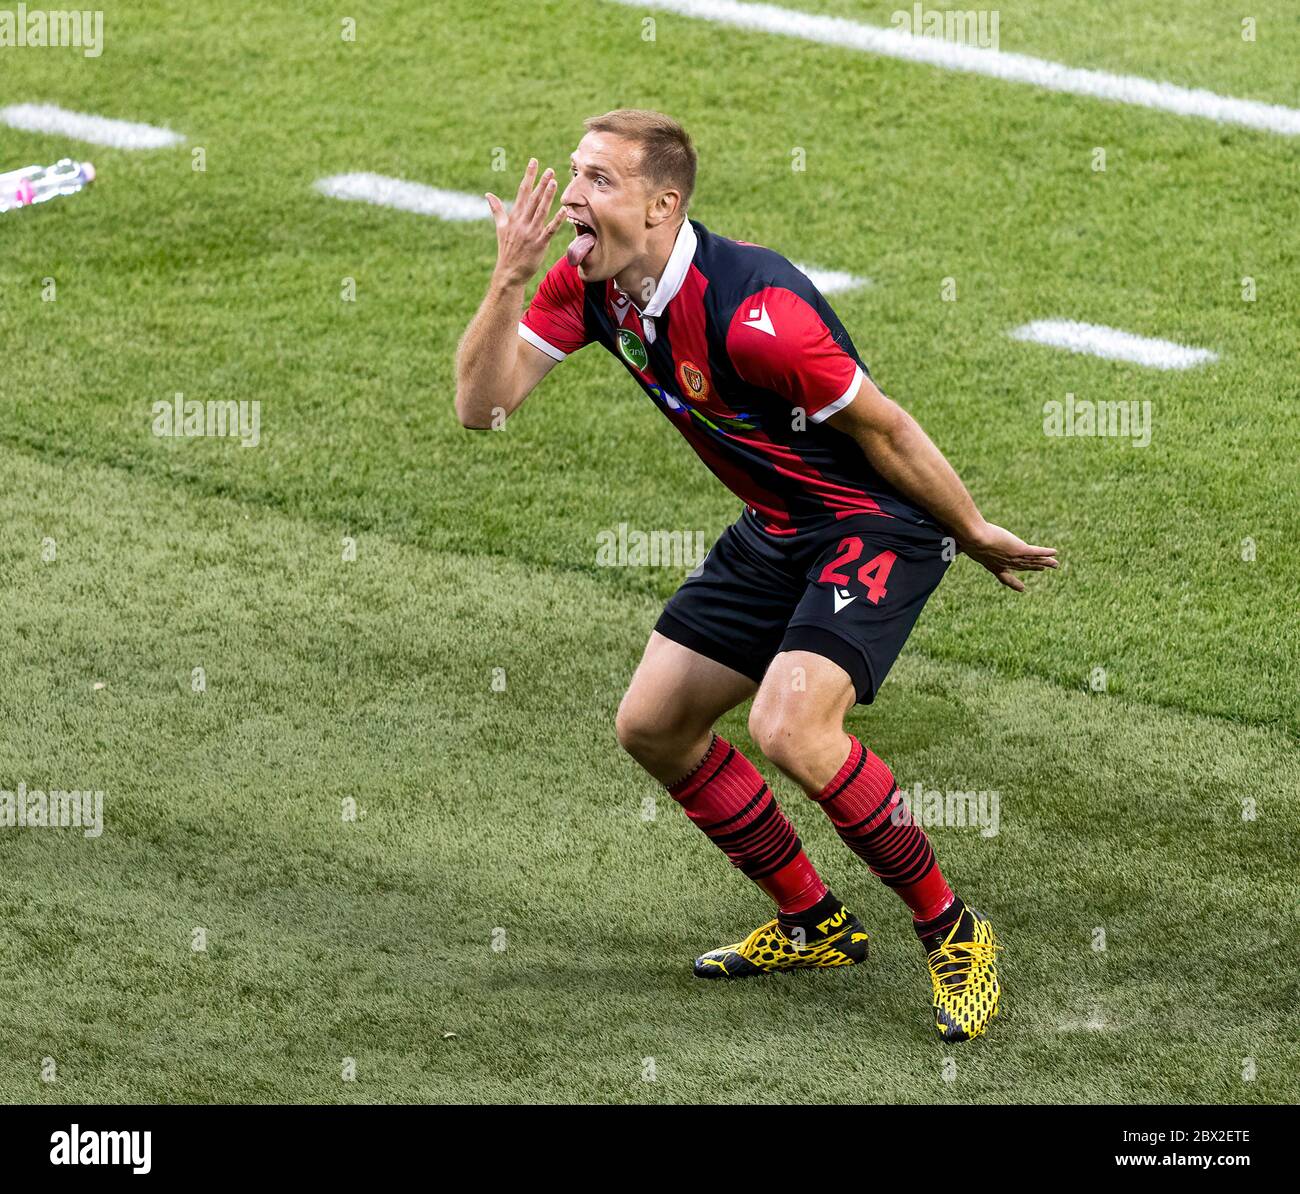 BUDAPEST, HUNGARY - JUNE 3: Djordje Kamber of Budapest Honved celebrates his goal during the Hungarian Cup Final match between Budapest Honved and Mezokovesd Zsory FC at Puskas Arena on June 3, 2020 in Budapest, Hungary. Stock Photo